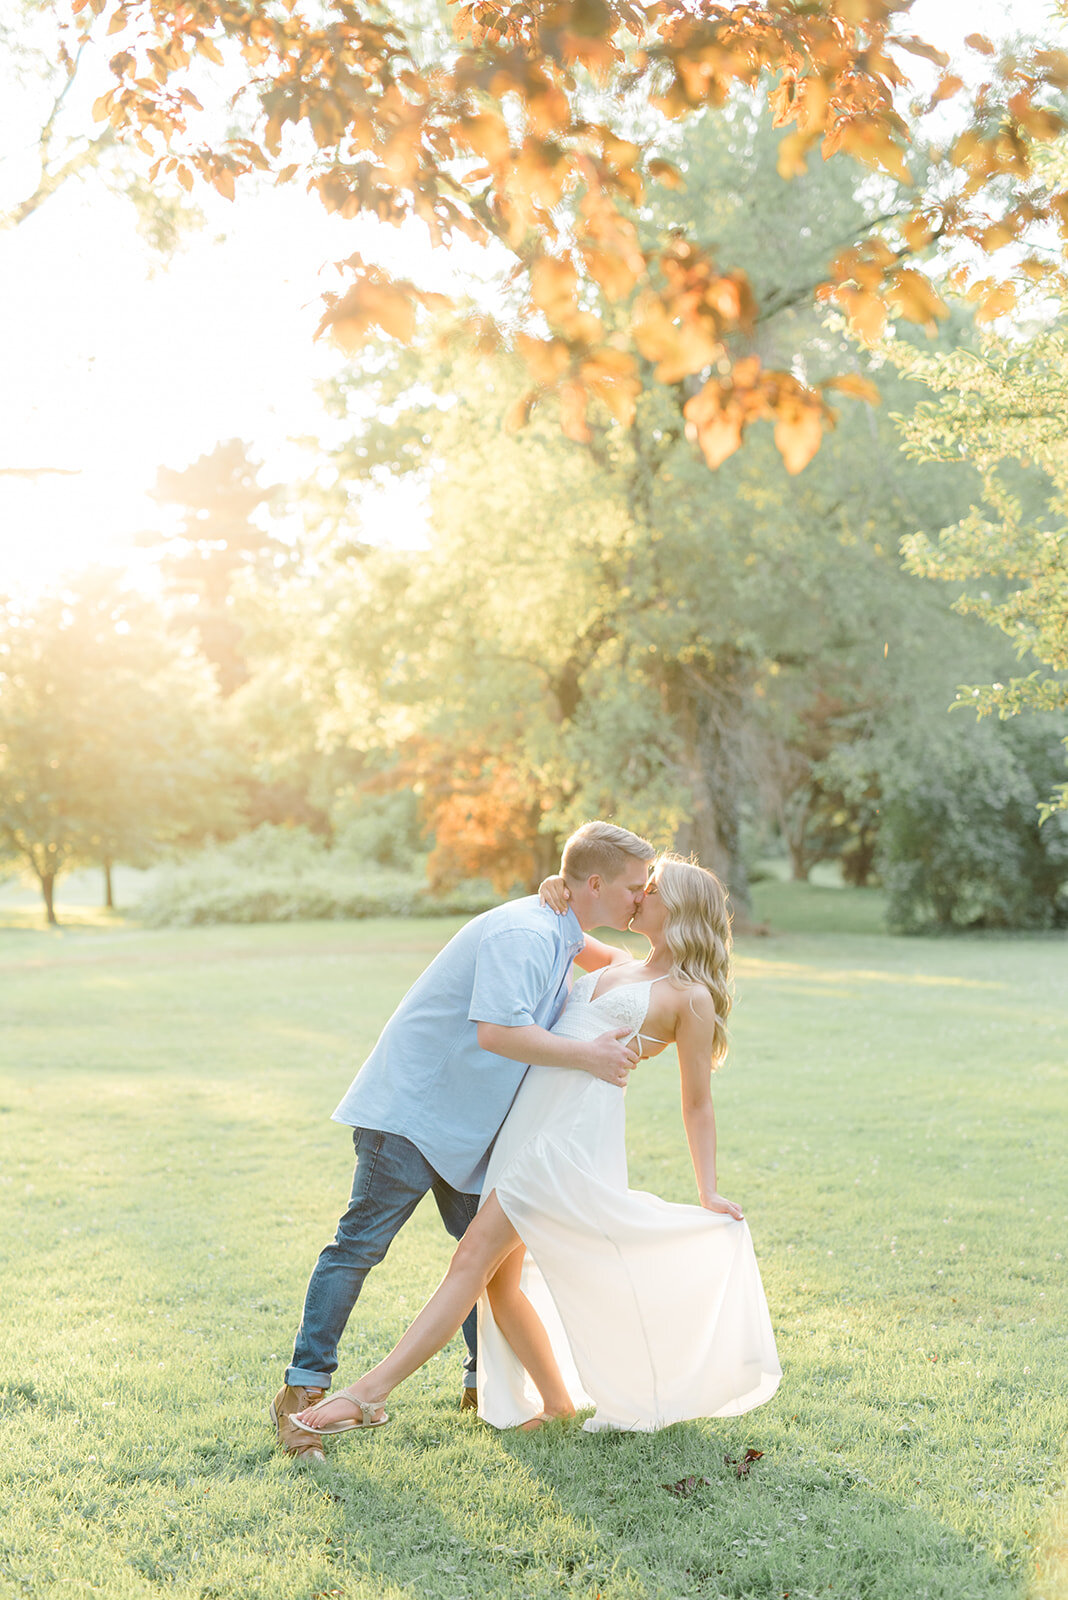 It was a beautiful day for Tiffany and Kyle’s dreamy engagement session at Glen Foerd on The Delaware. Photographed by Amber Dawn Photography